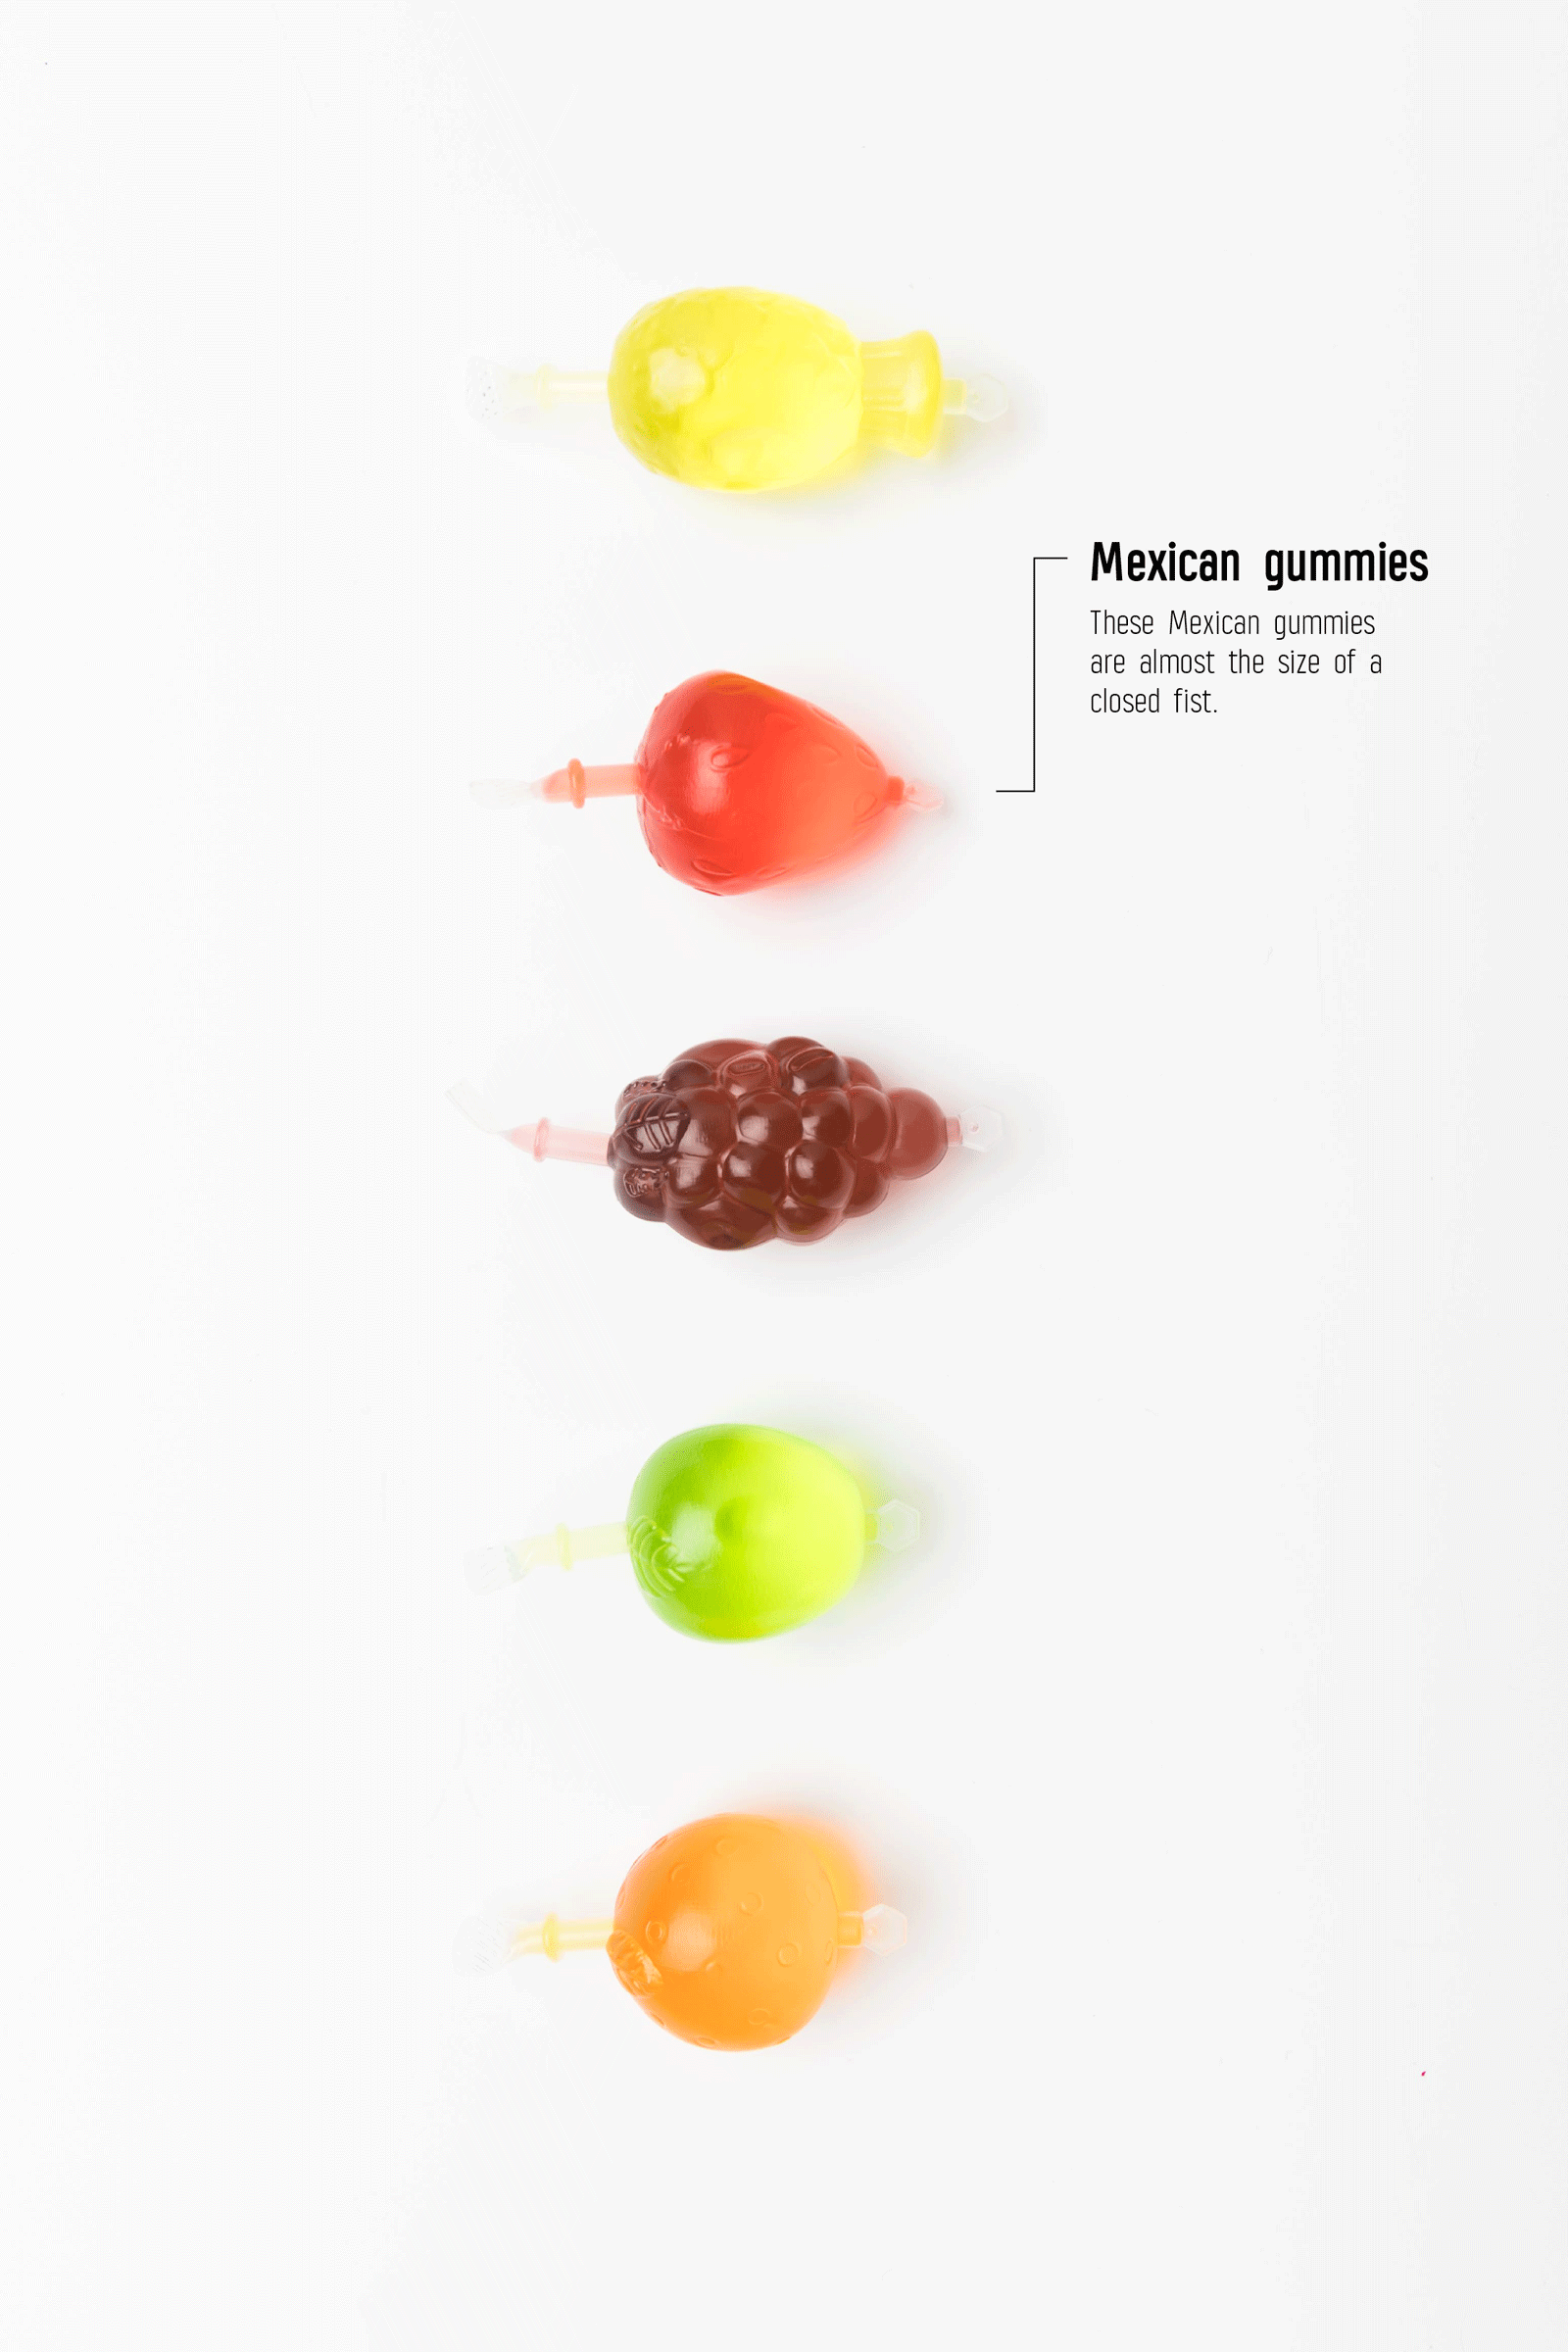 Mexican gummy candy photographed on a white background